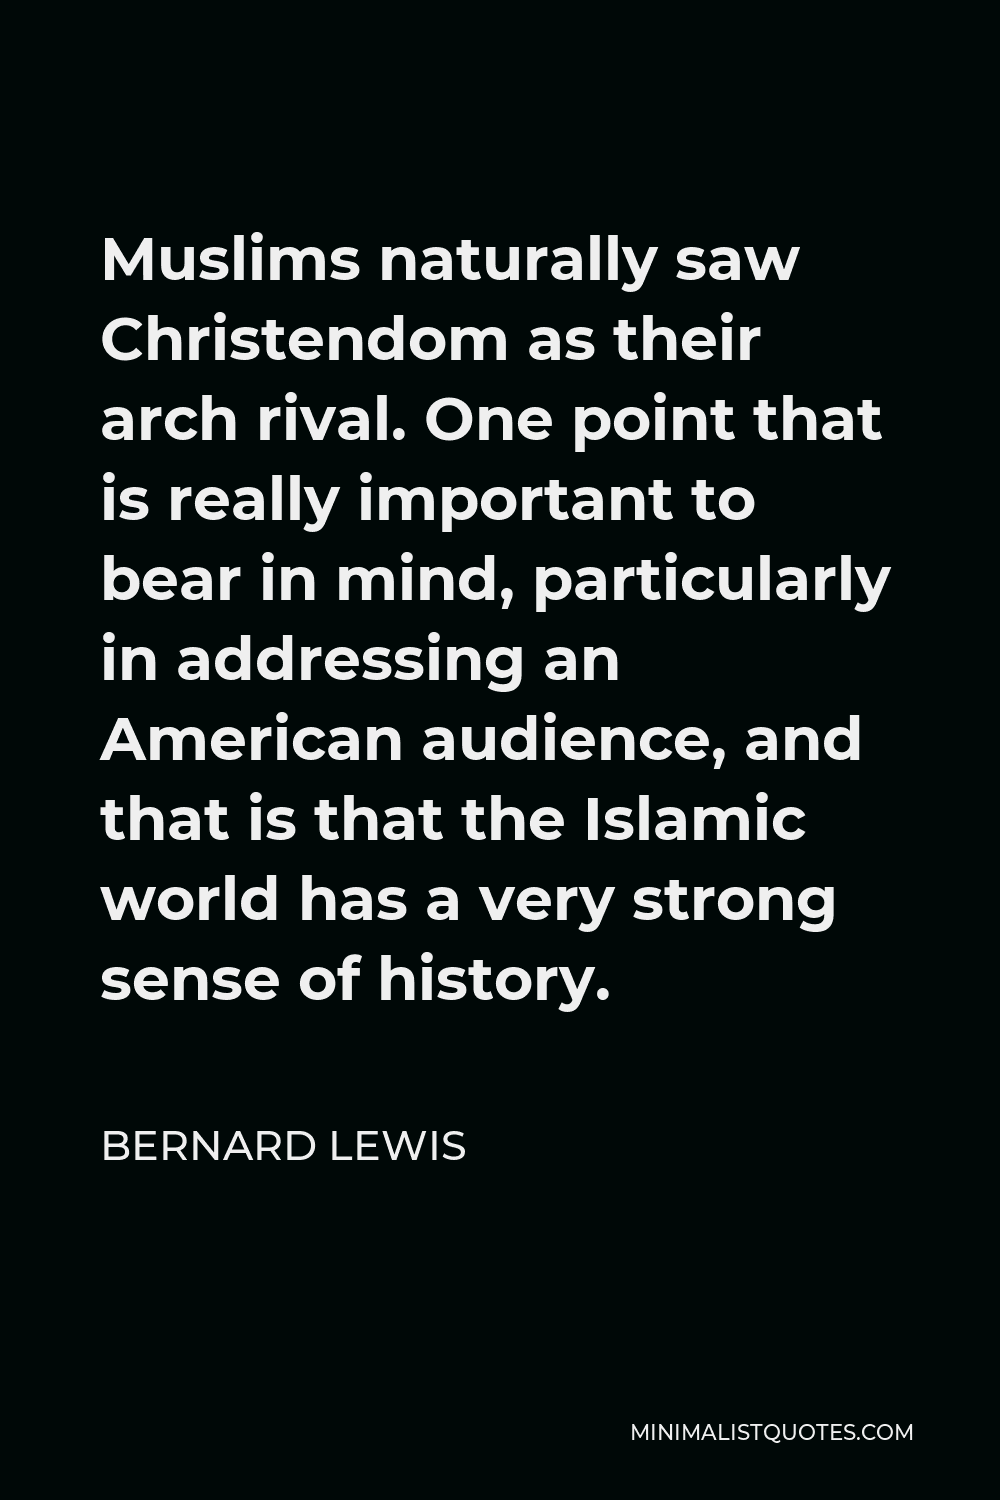 Bernard Lewis Quote - Muslims naturally saw Christendom as their arch rival. One point that is really important to bear in mind, particularly in addressing an American audience, and that is that the Islamic world has a very strong sense of history.